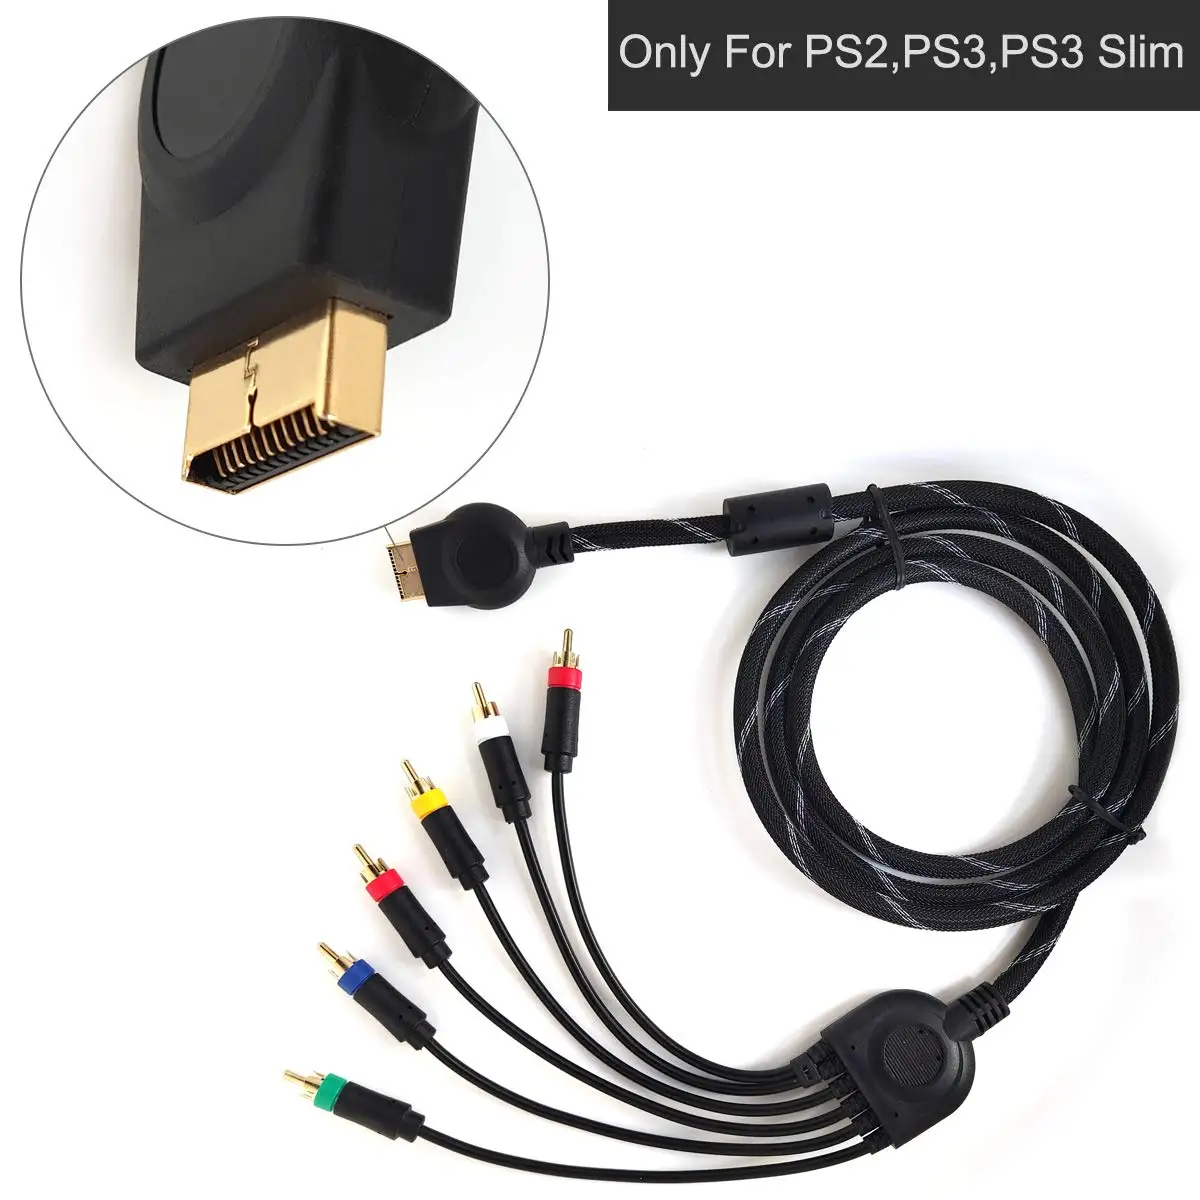 Component AV Cable for PS2 / PS3 / PS3 Slim, HD Multi Out Composite RCA  Audio Video Cable for Sony Playstation PS3 (6 Feet)